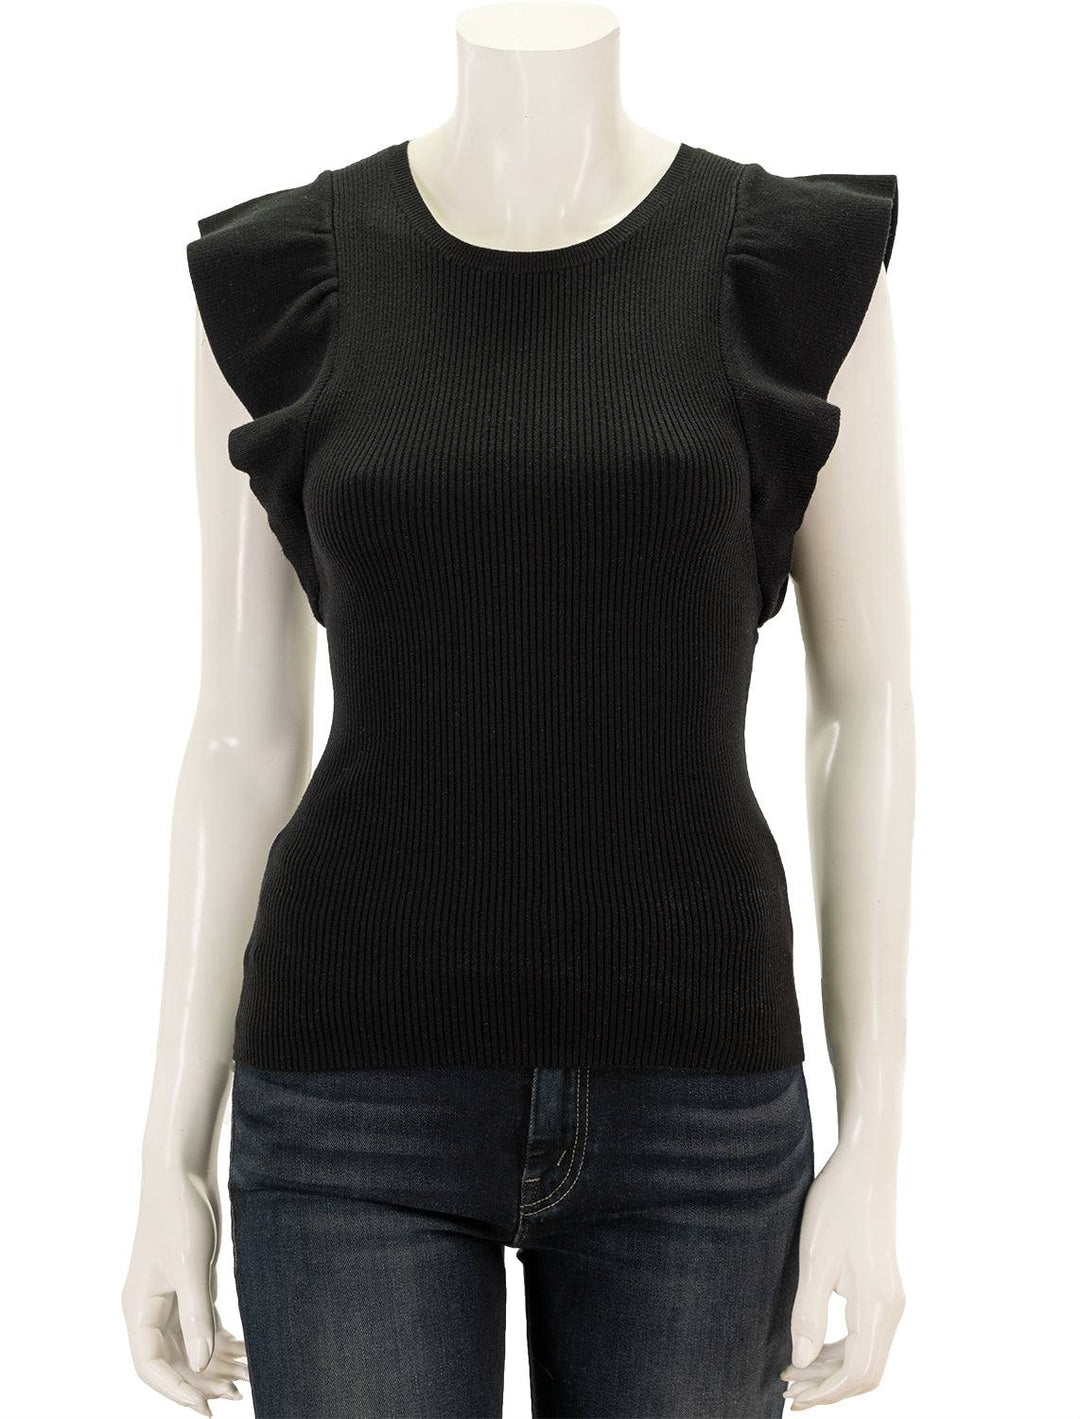 Front view of Marie Oliver's rory top in black.